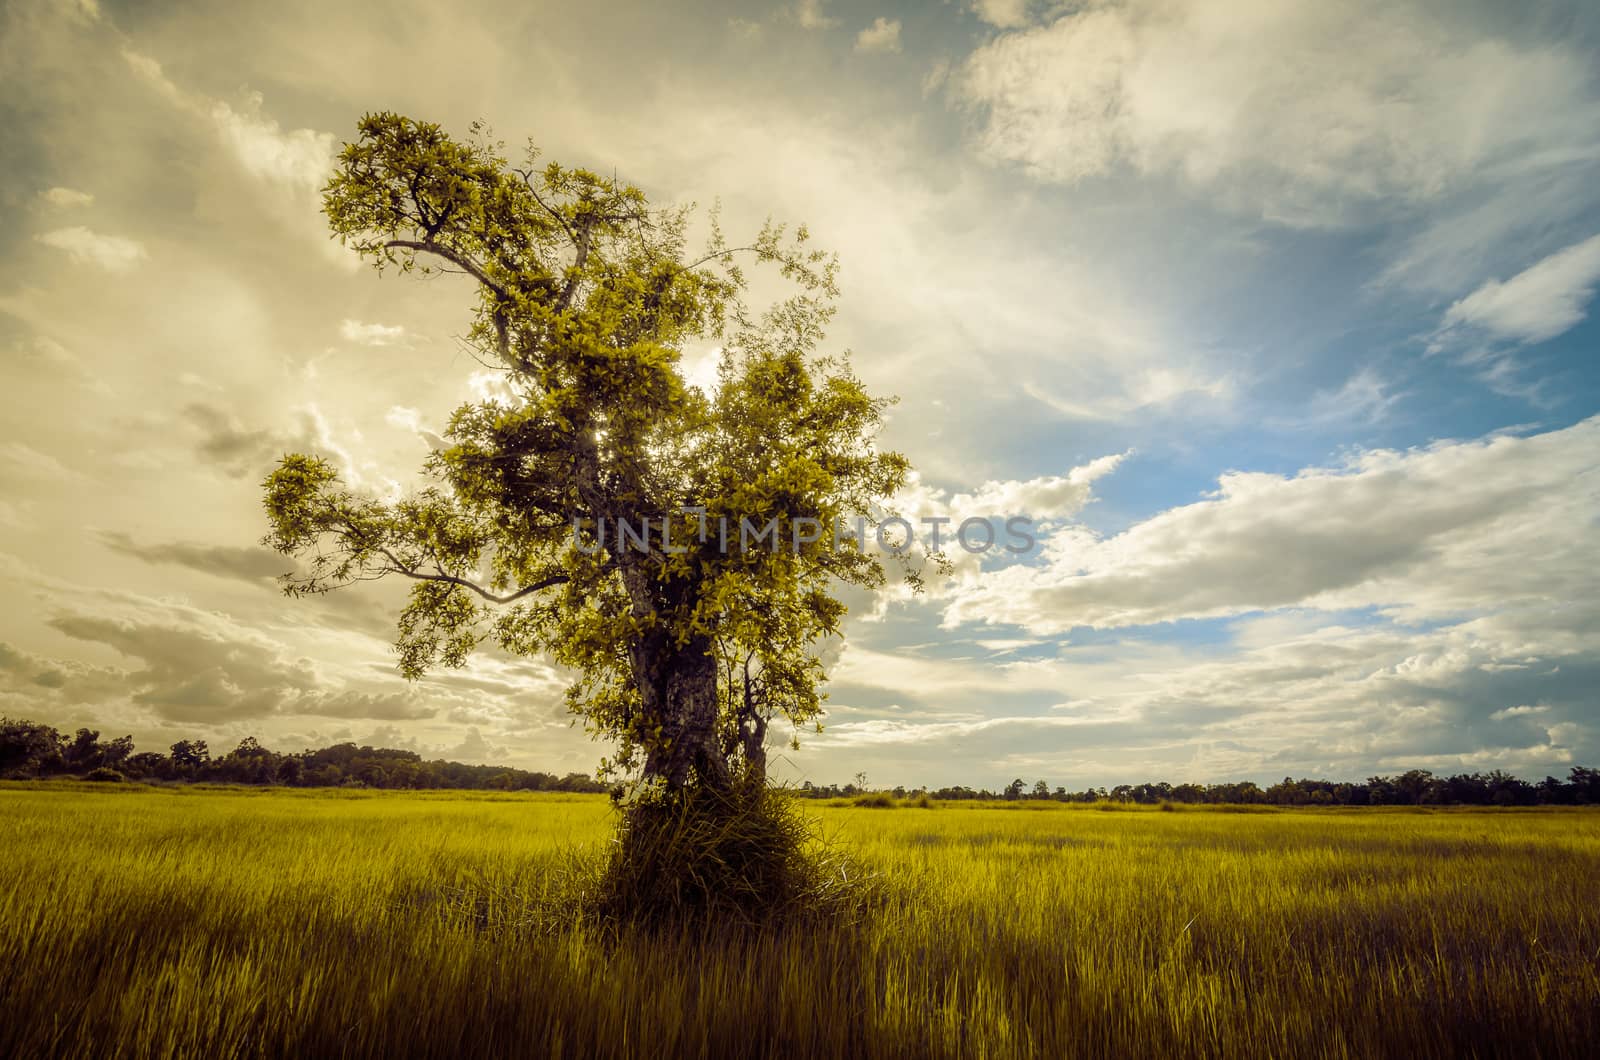 Tree grass field and sky in countryside Thailand vintage